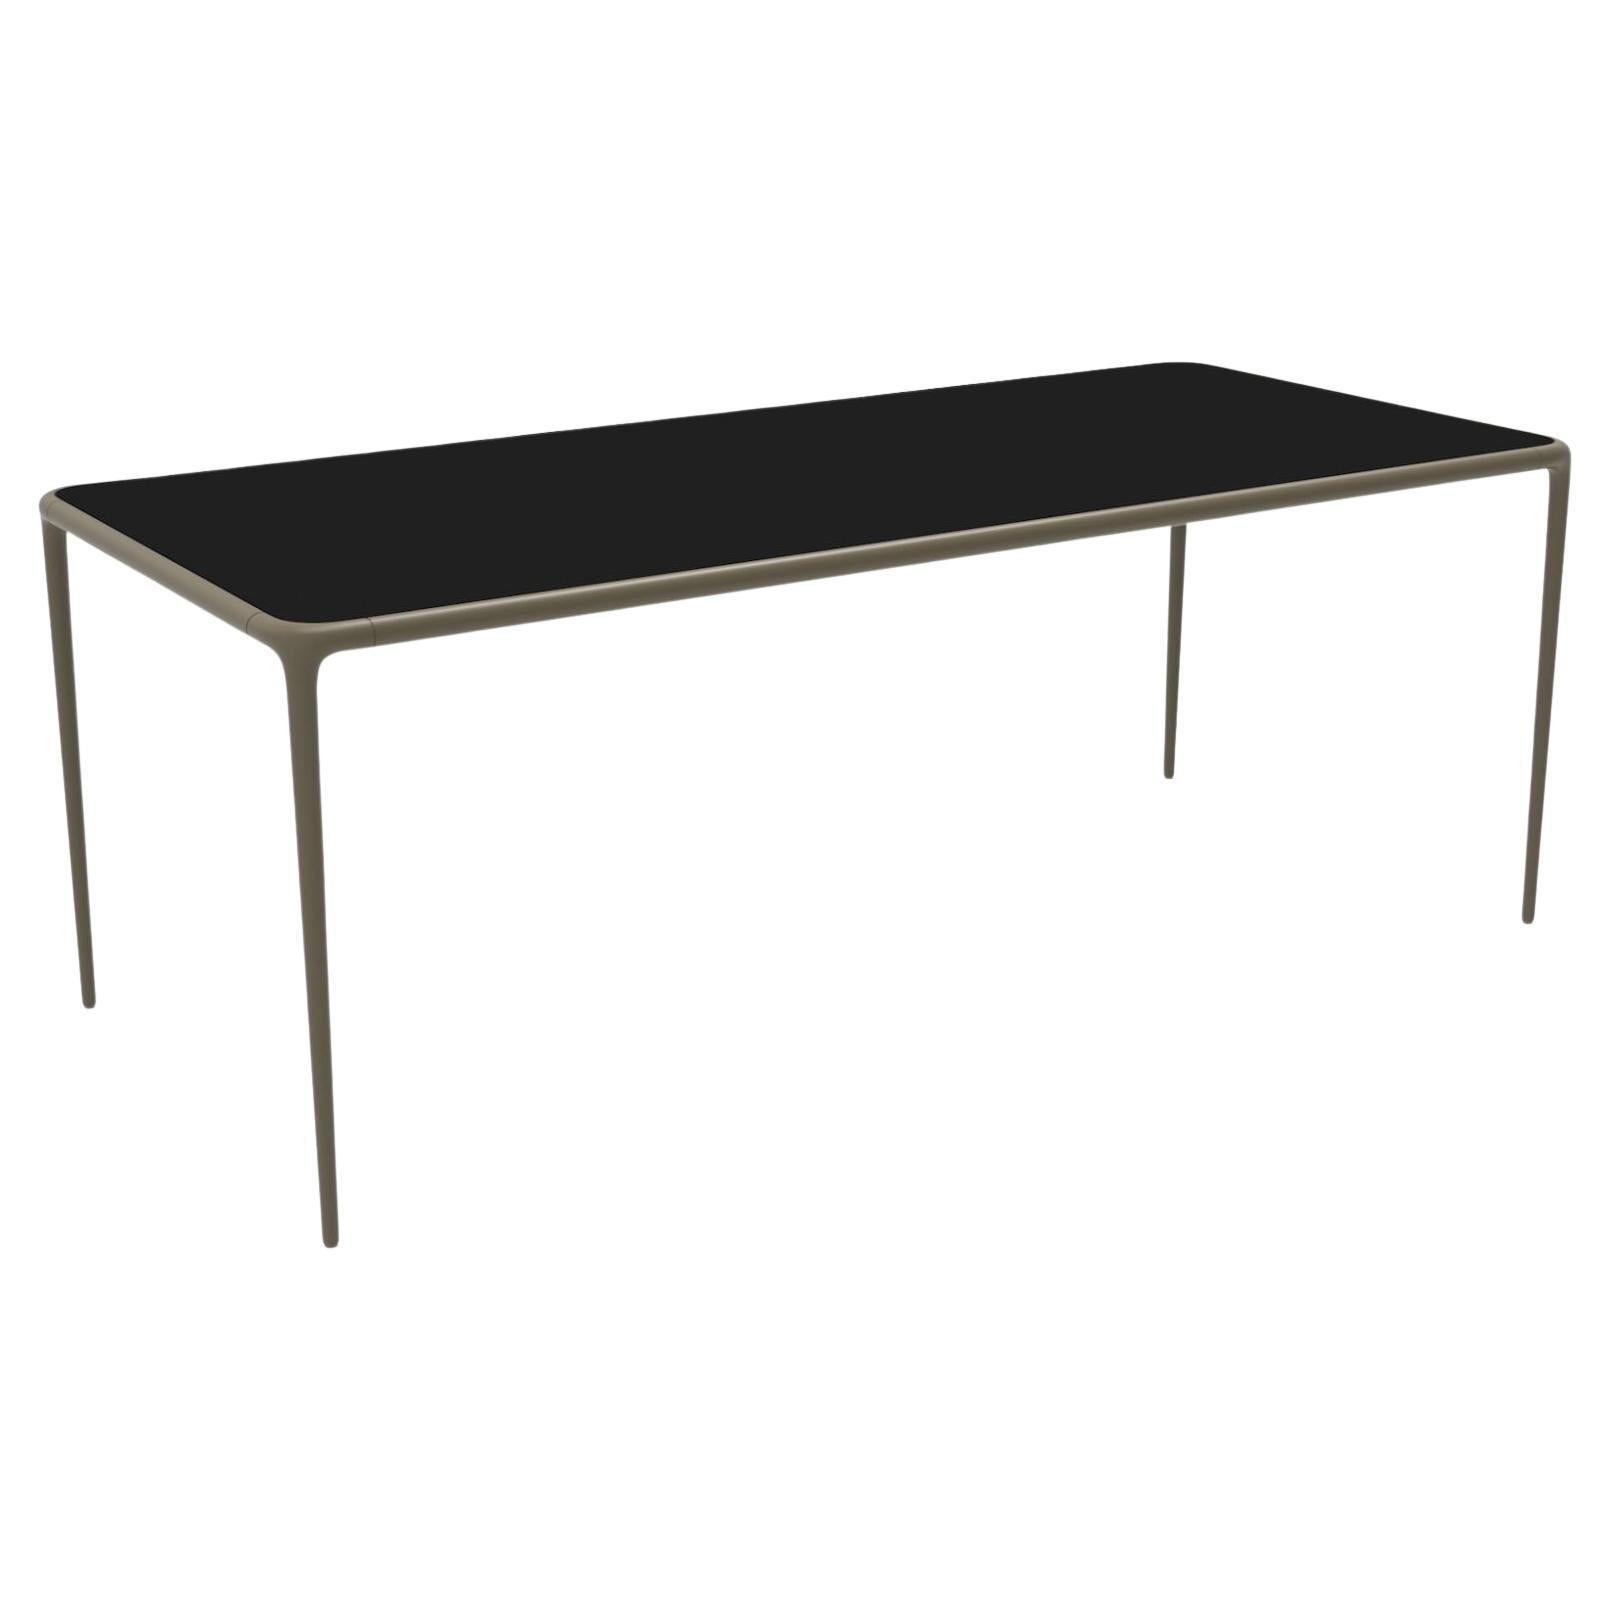 Xaloc Bronze Glass Top 200 Table by Mowee For Sale